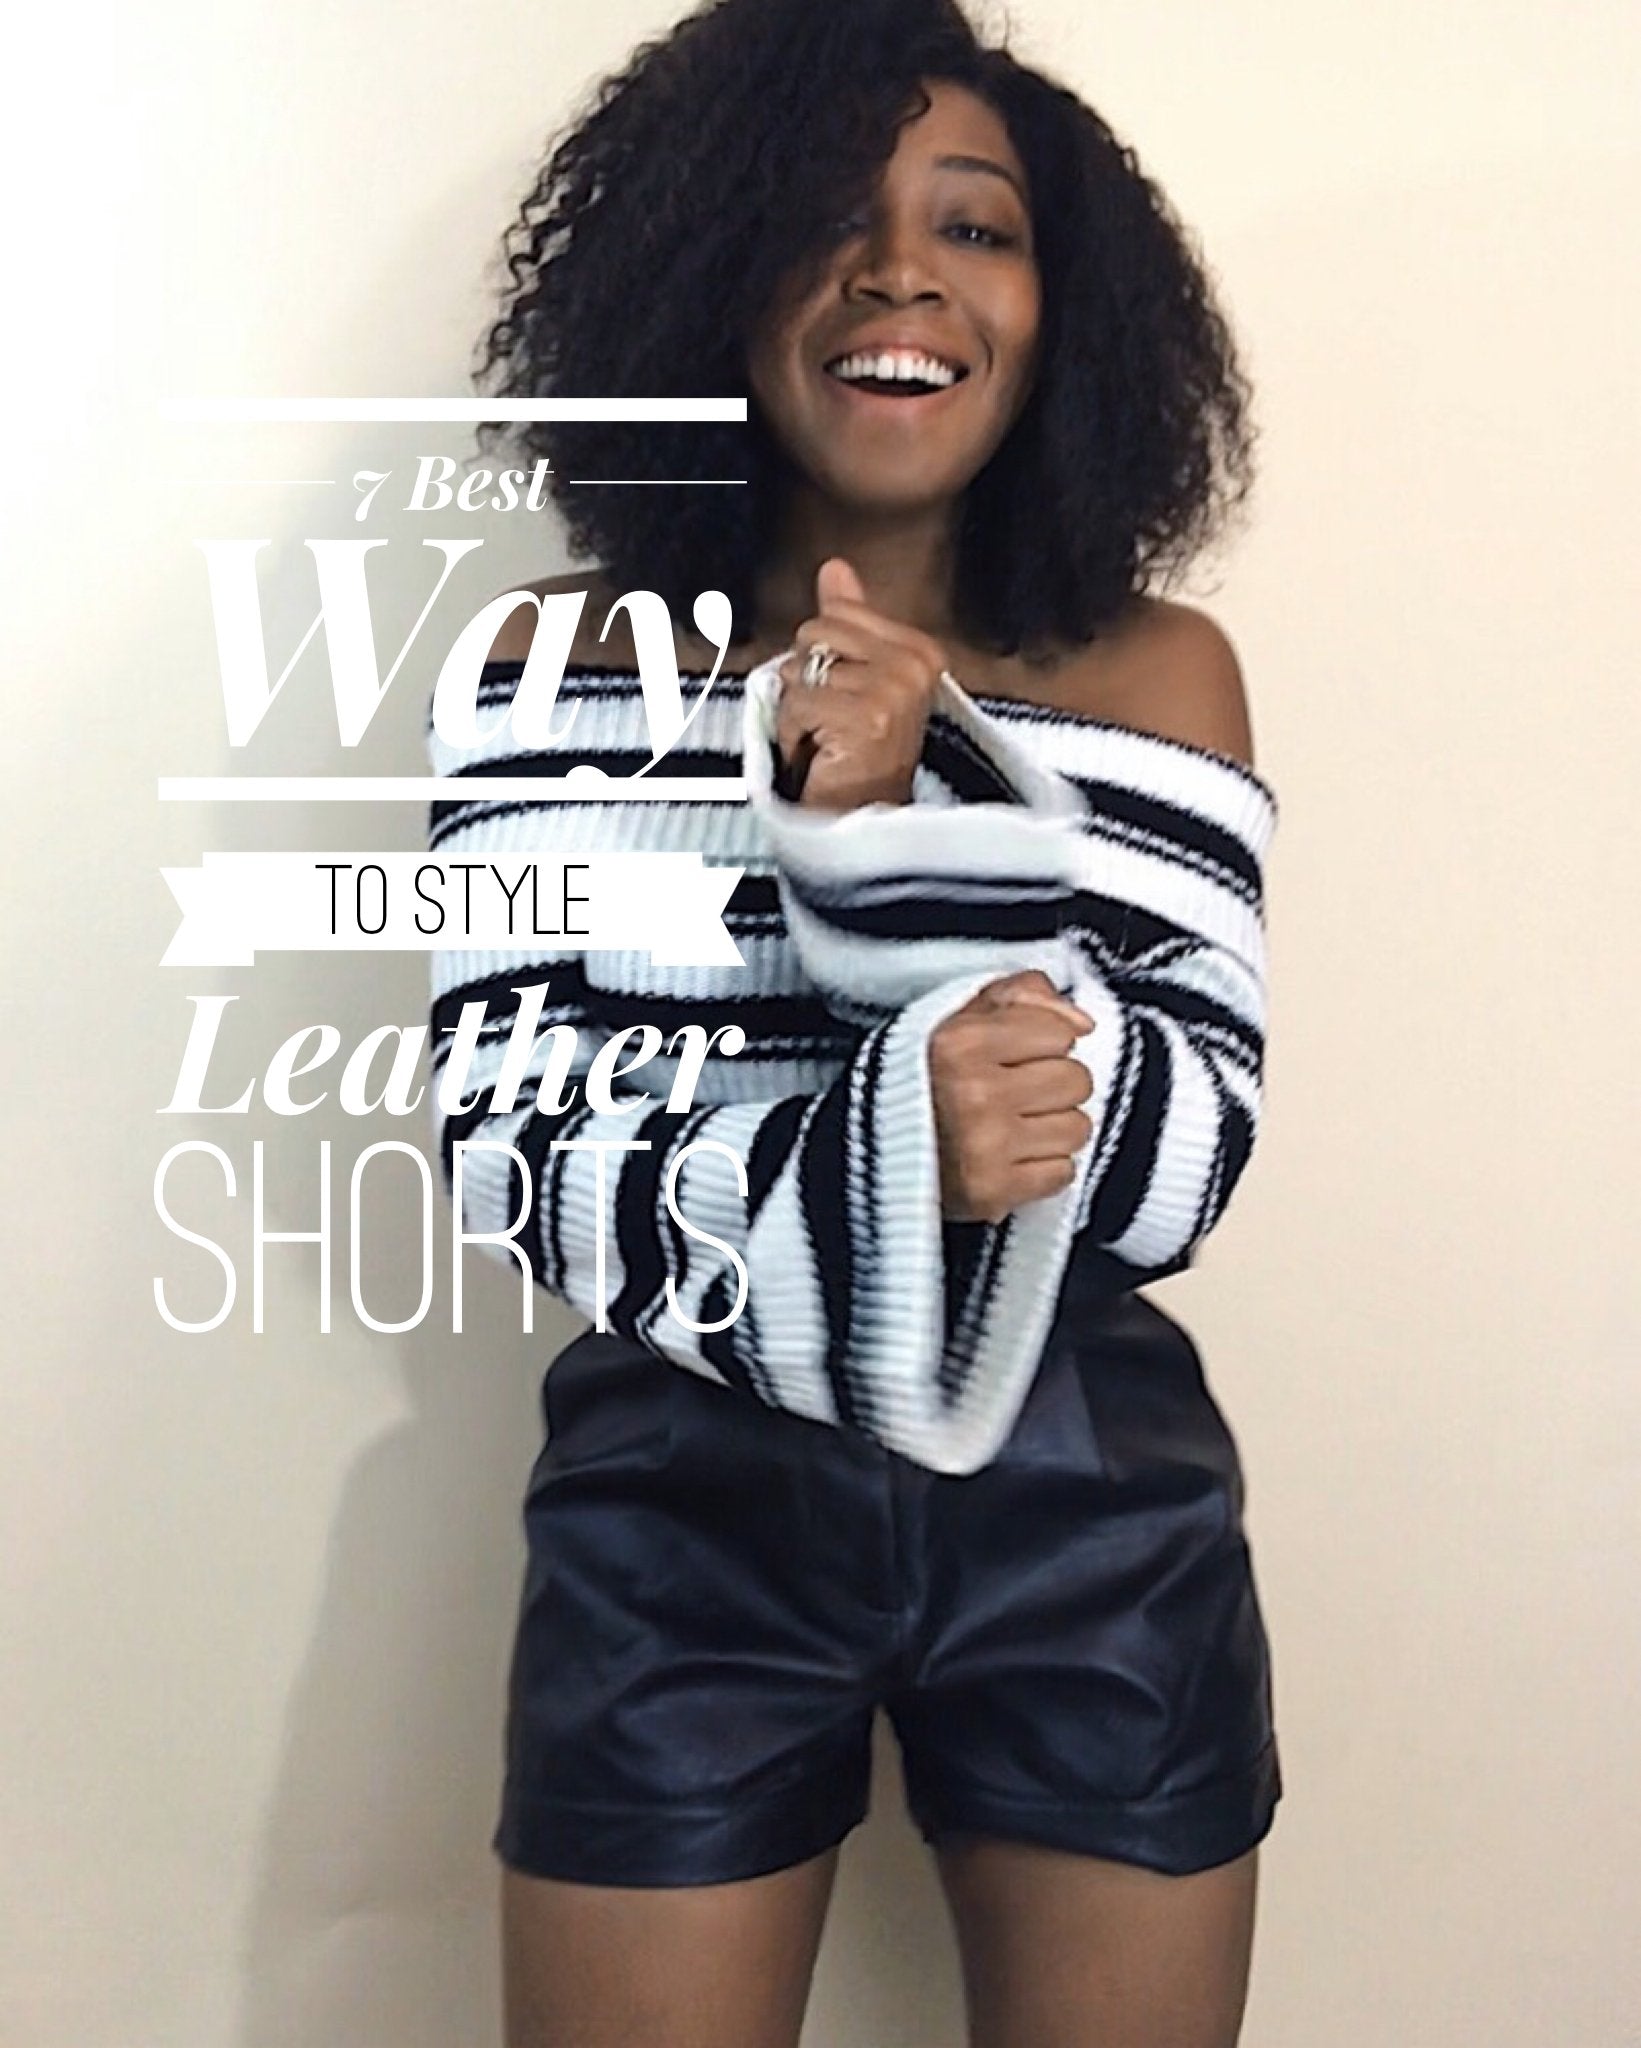 7 Easy Way to Wear Leather Shorts